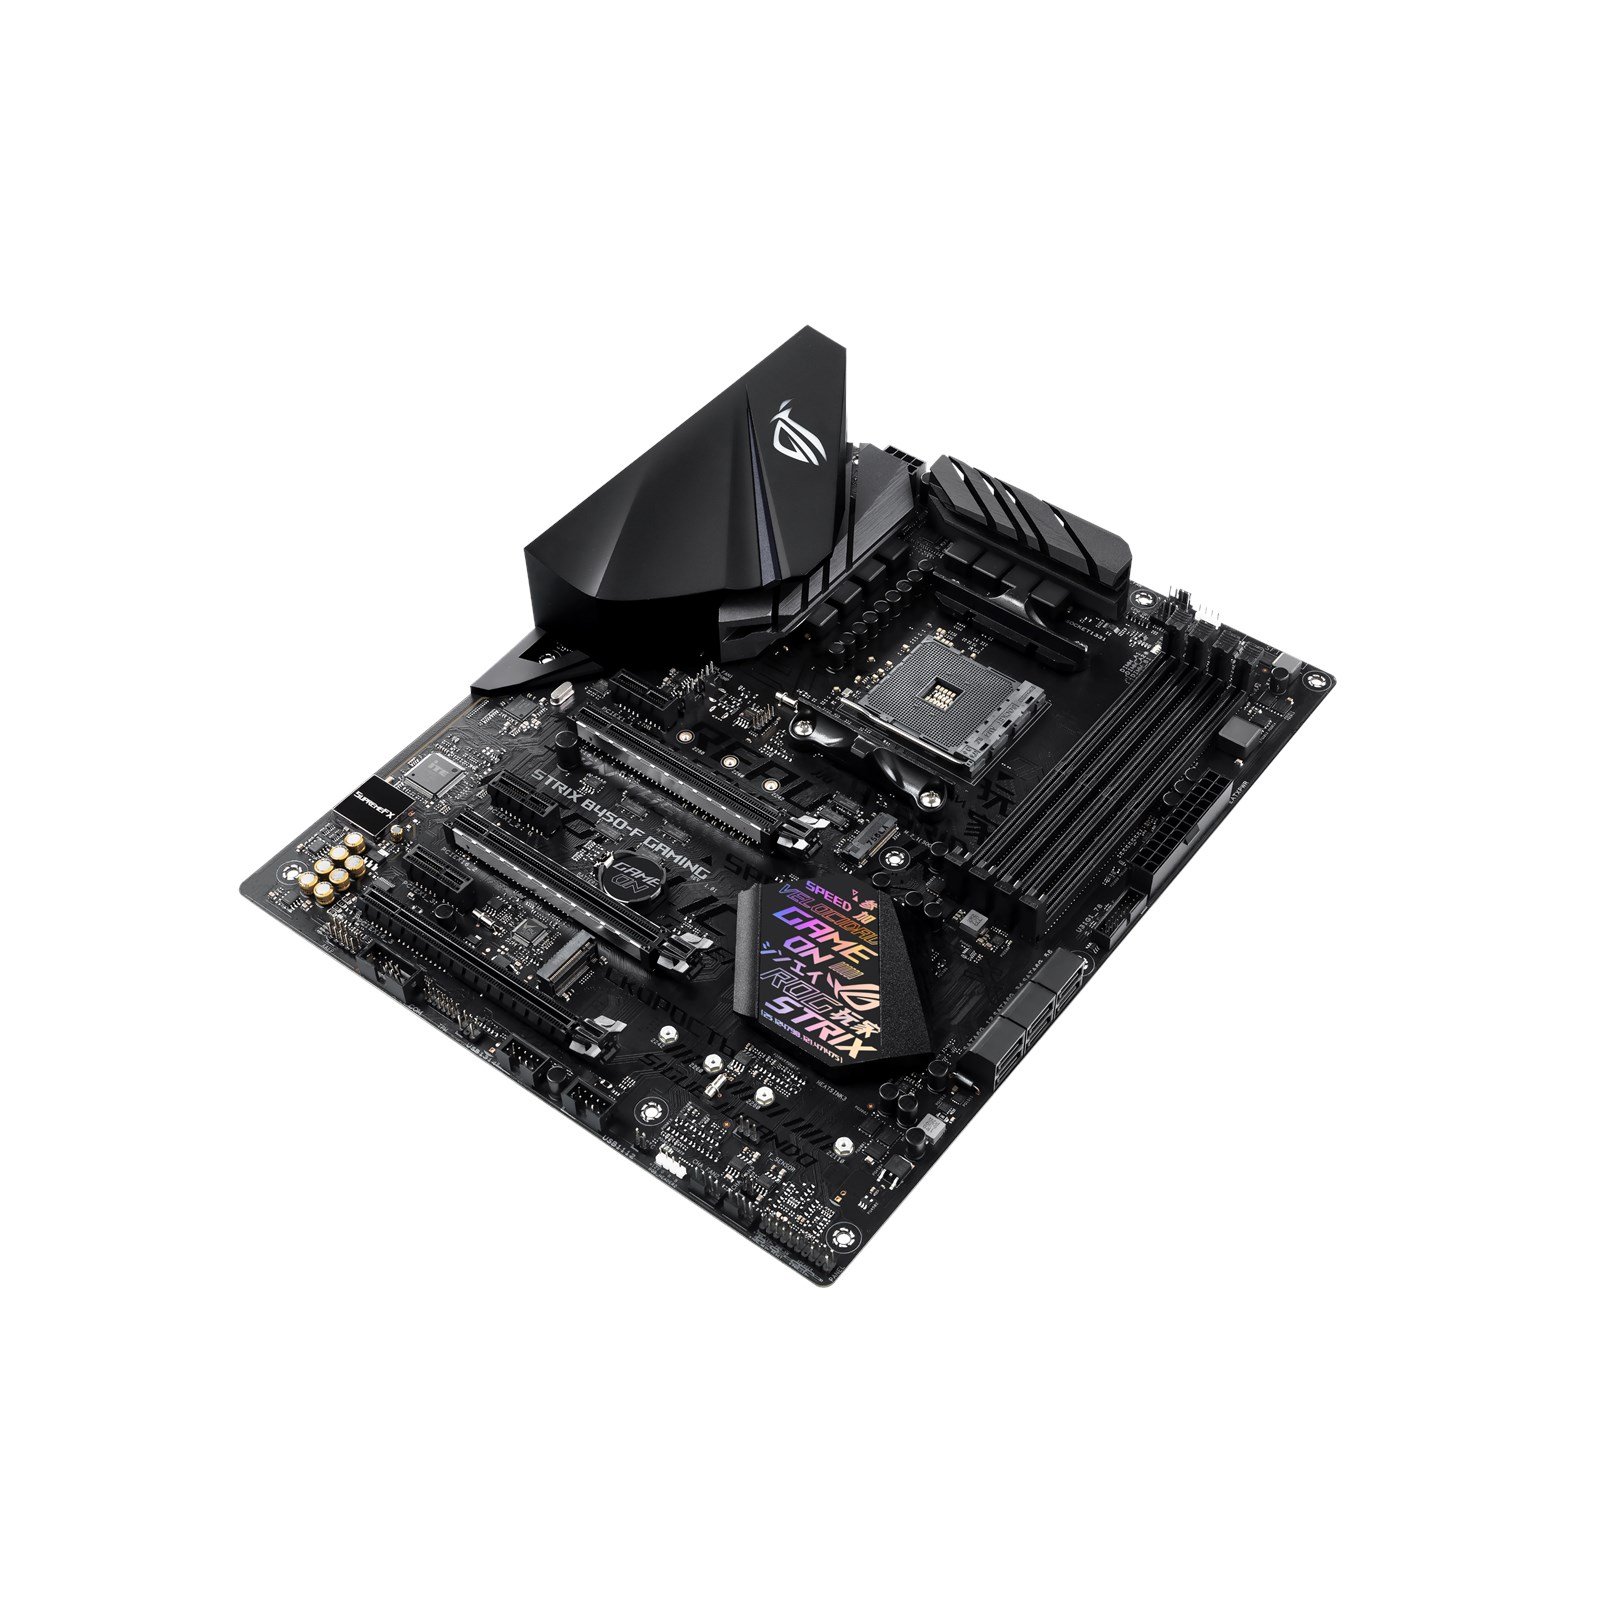 Asus Rog Strix B450 F Gaming Amd Motherboard 90mb0ys0 M0eay0 Ccl Computers